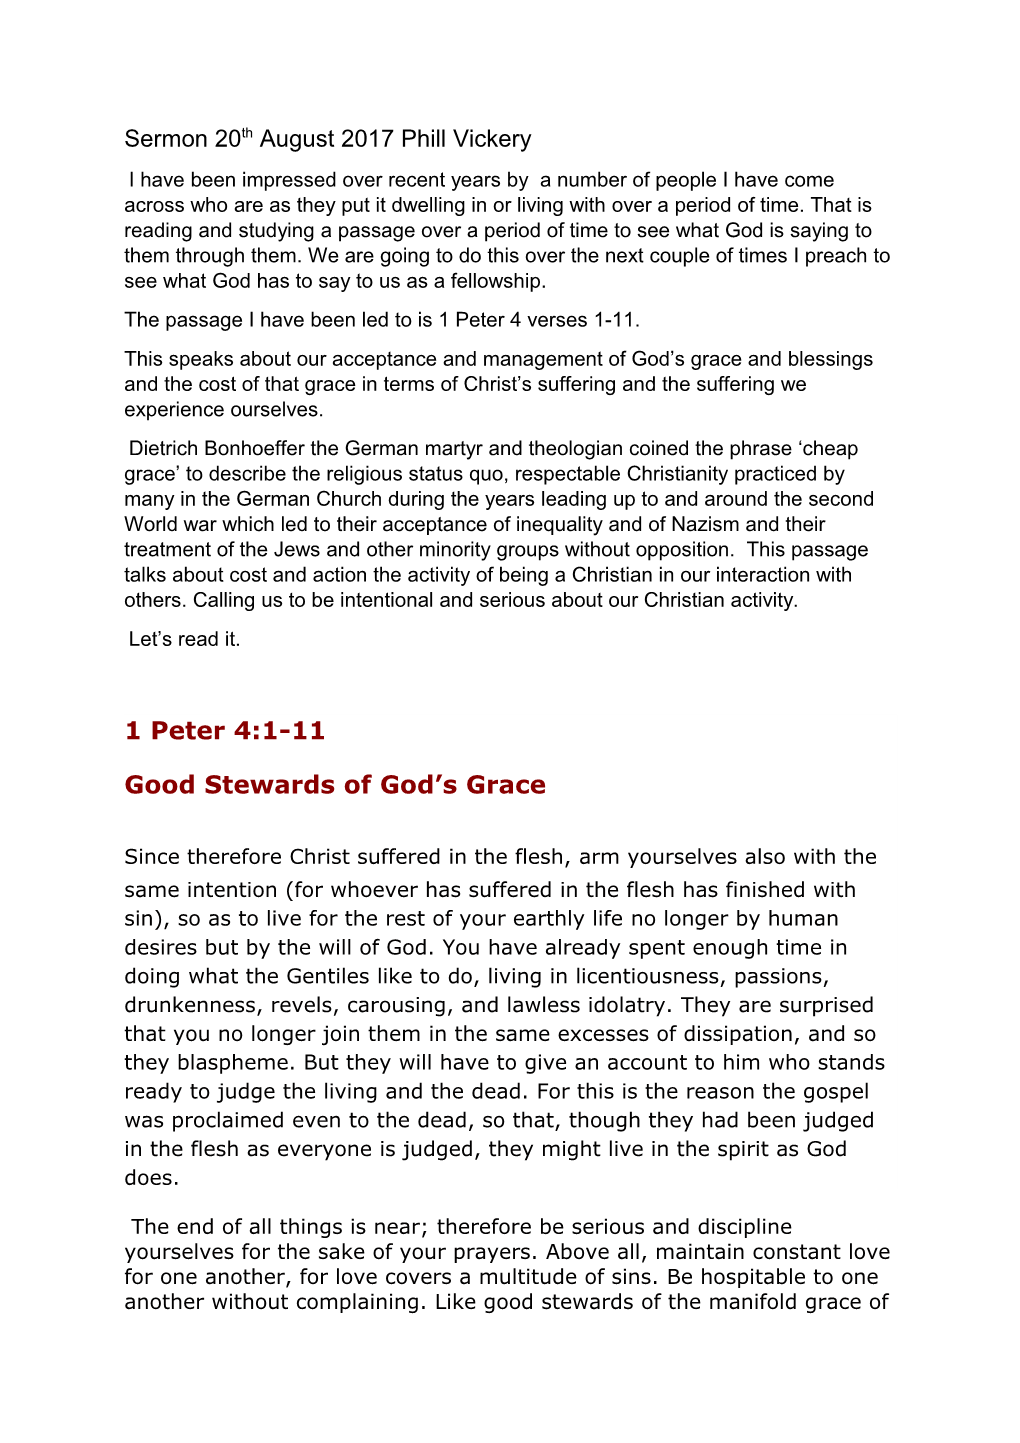 The Passage I Have Been Led to Is 1 Peter 4 Verses 1-11